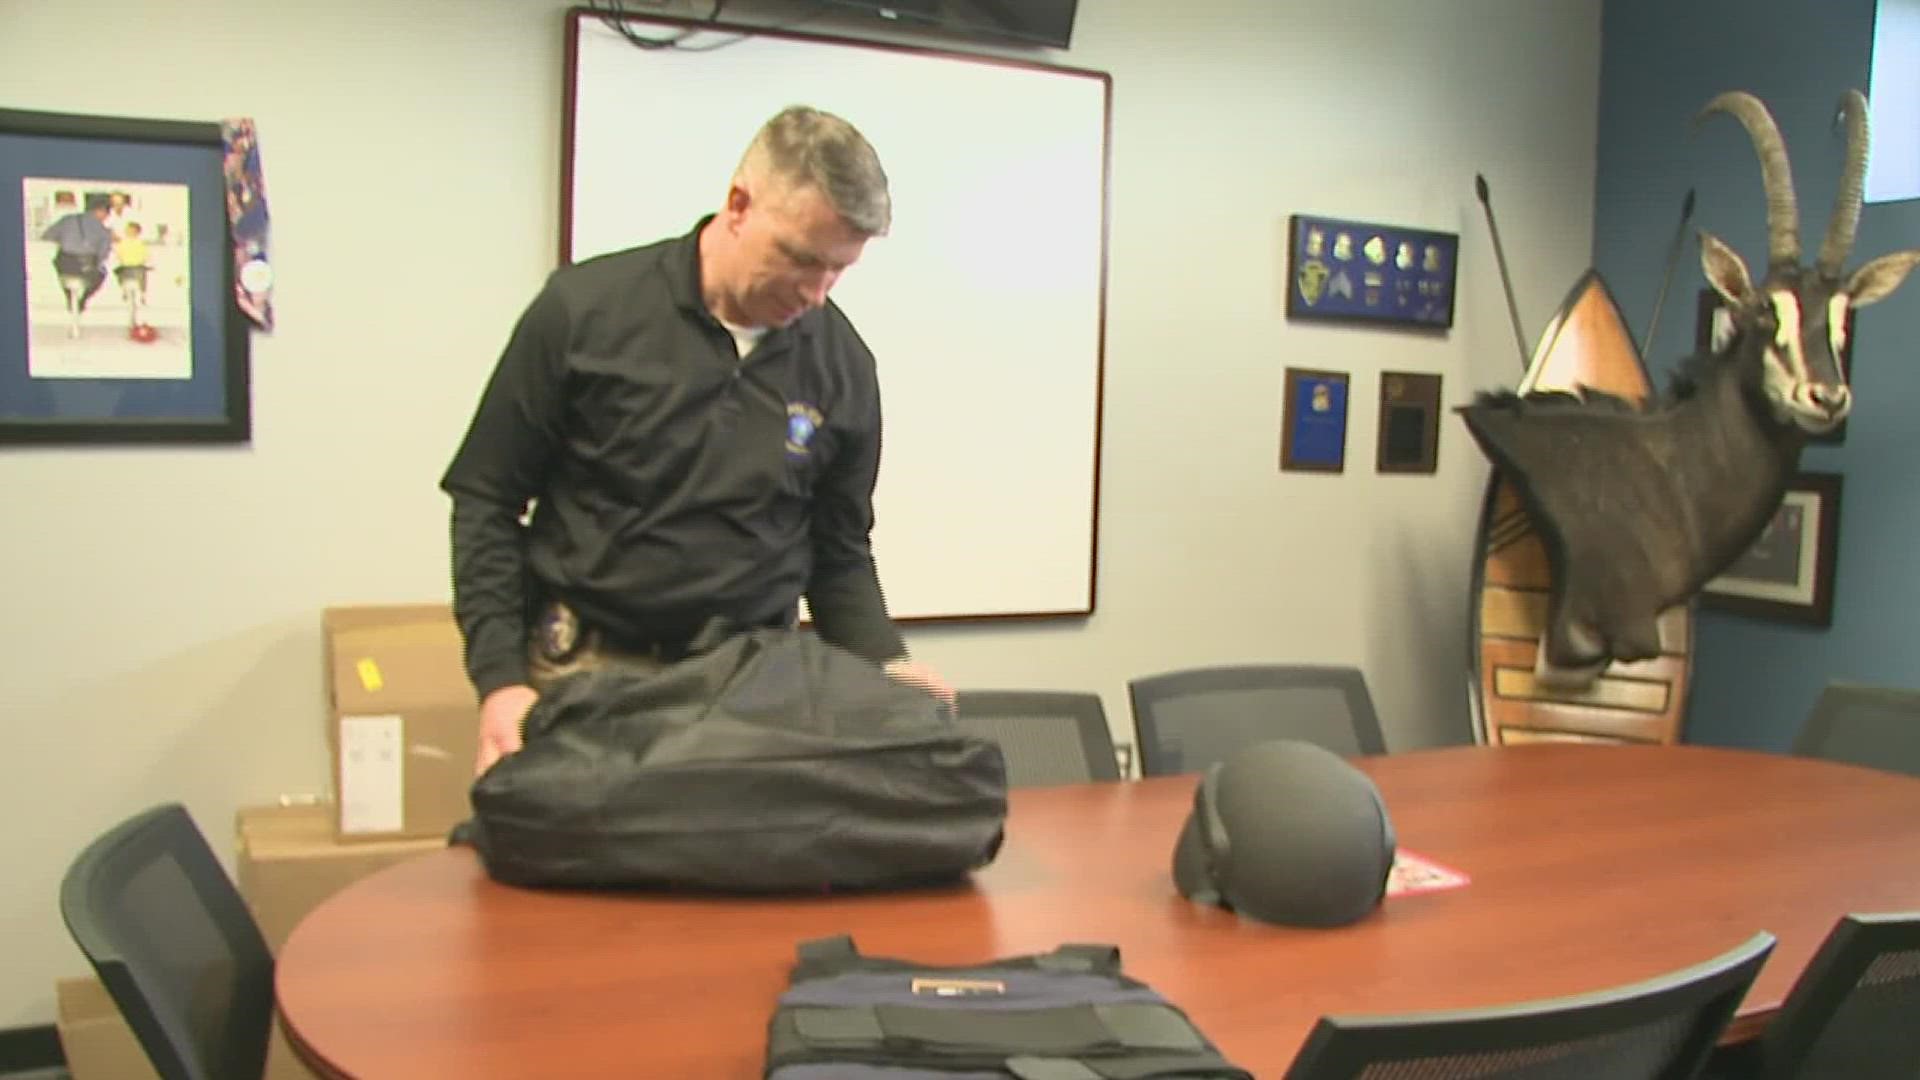 DeWitt police are one of 19 departments across Iowa to donate equipment to the frontlines